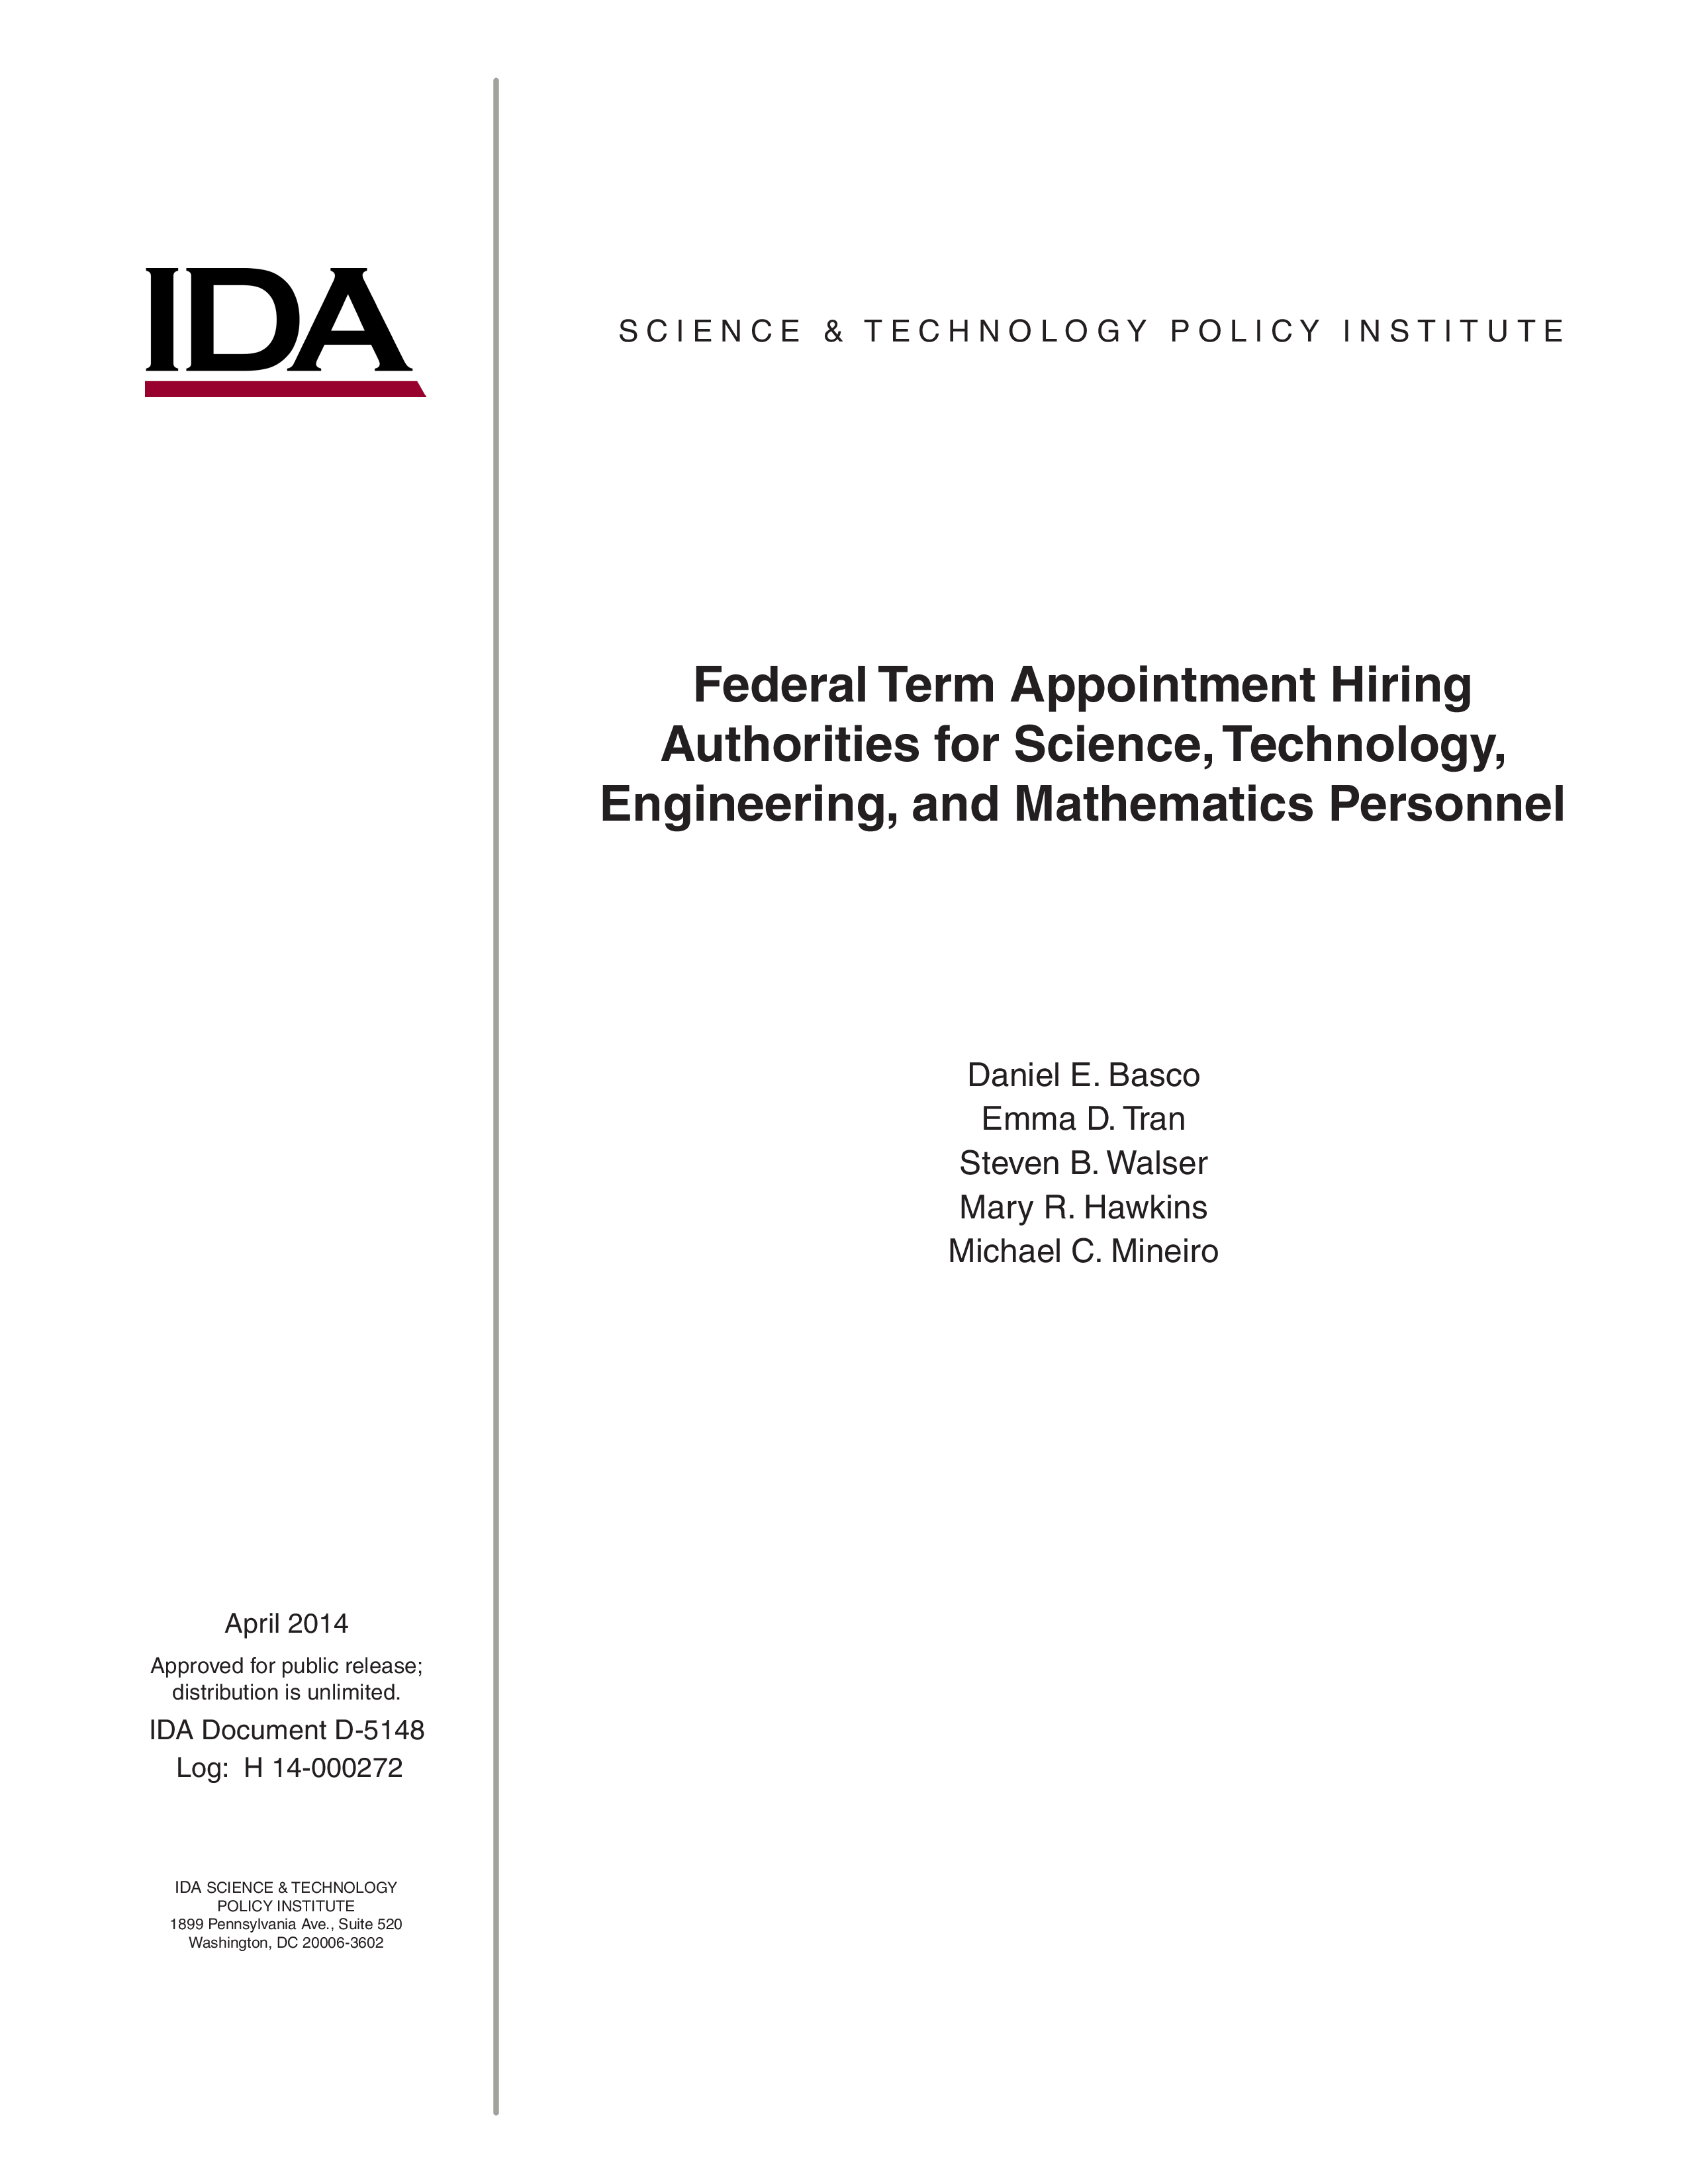 Federal Term Appointment Hiring Authorities for Science, Technology, Engineering, and Mathematics Personnel